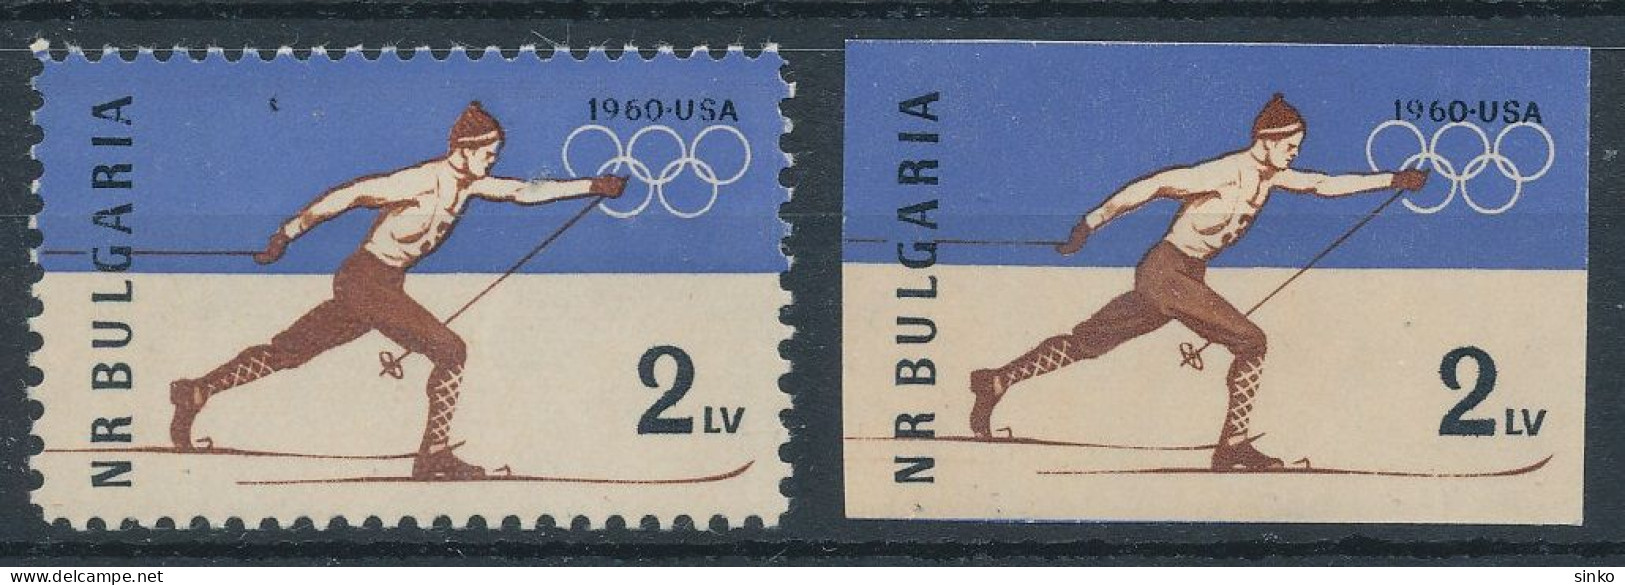 1960. Bulgaria - Olympic Games - Invierno 1960: Squaw Valley